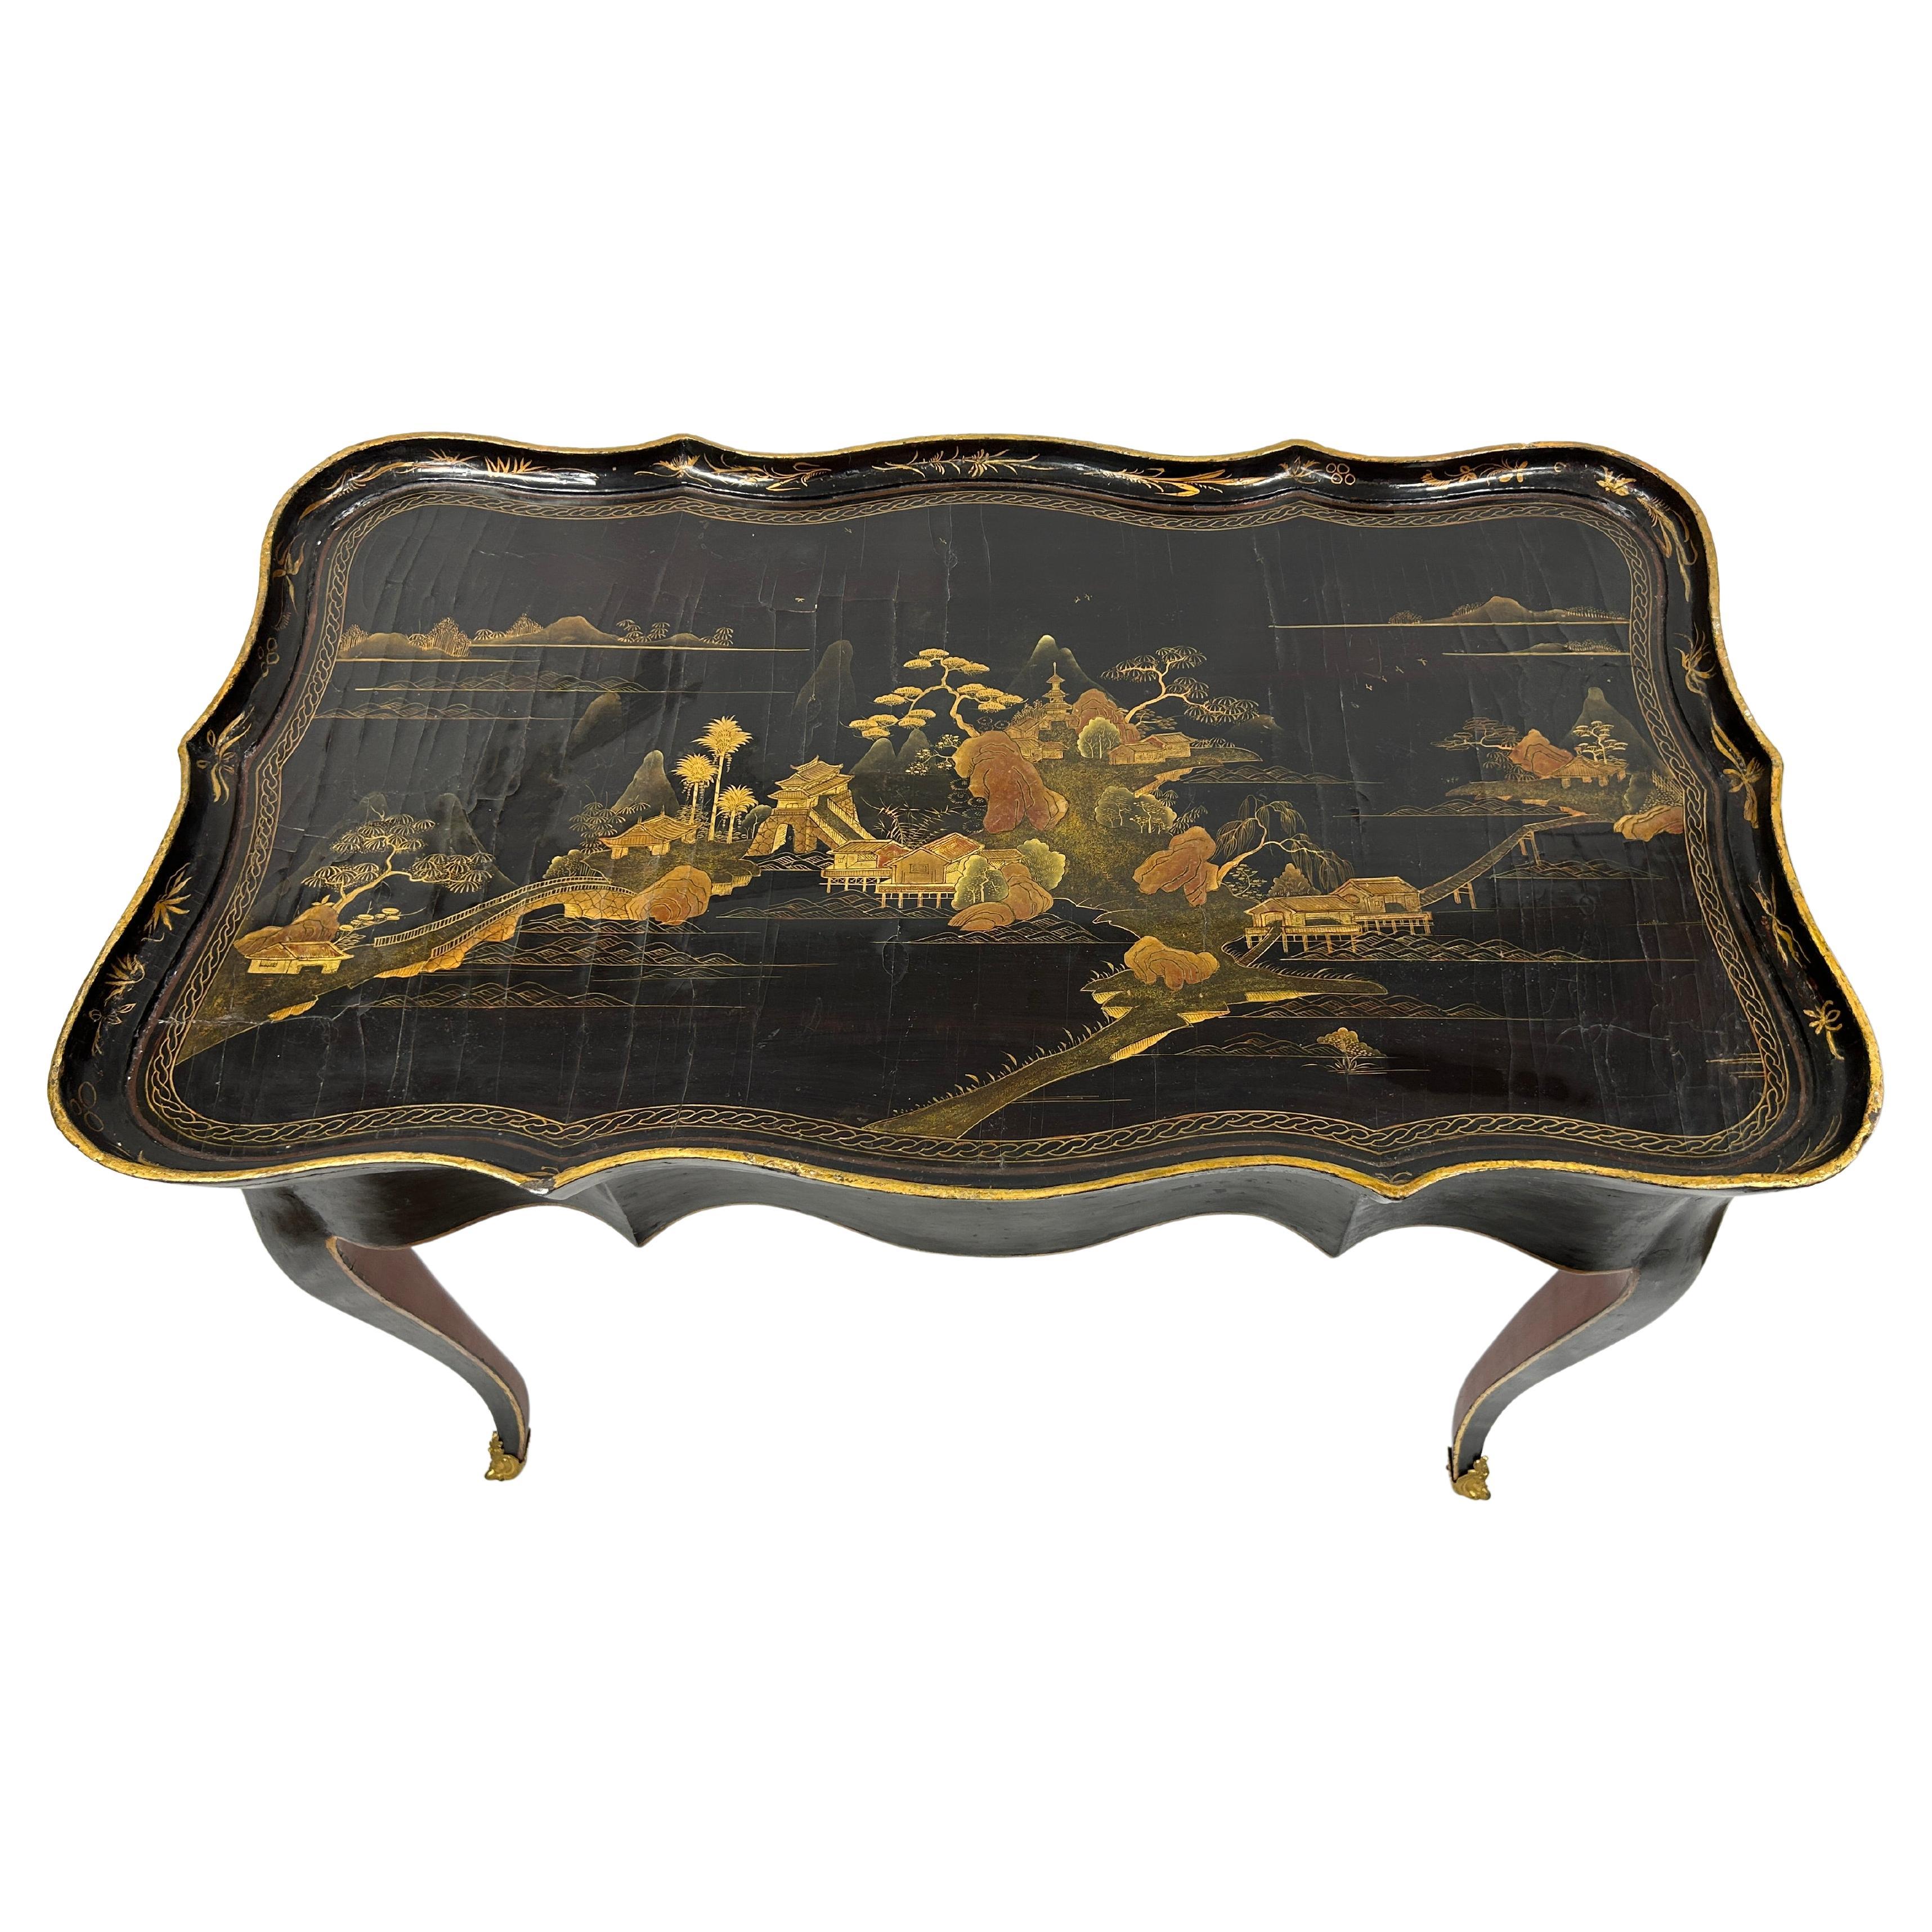 19th Century English Lacquered Chinoiserie Table